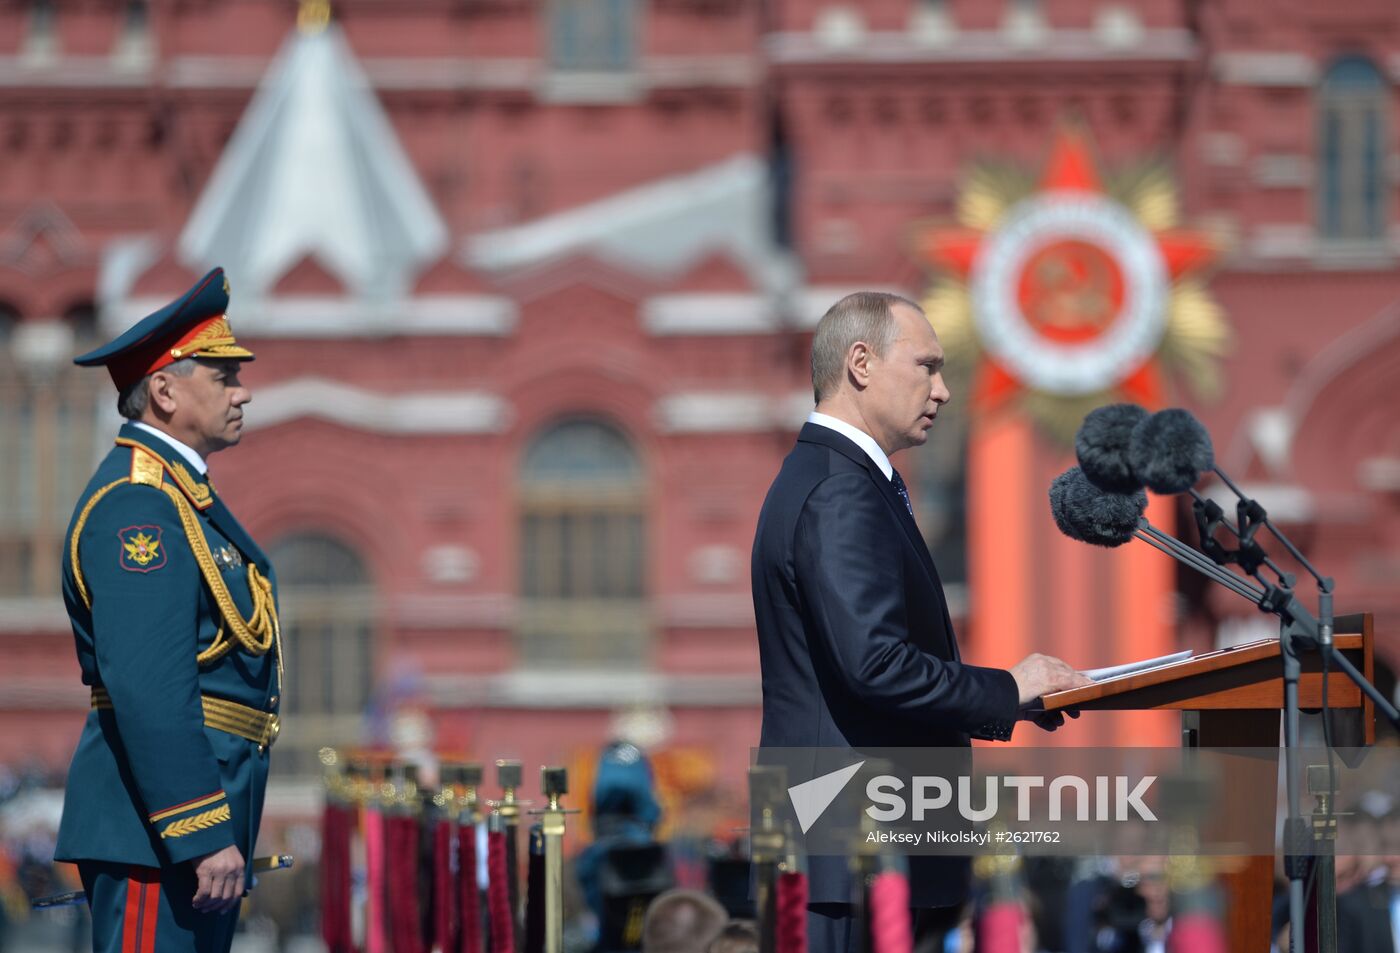 President Putin at military parade to mark 70th anniversary of Victory in 1941-1945 Great Patriotic War